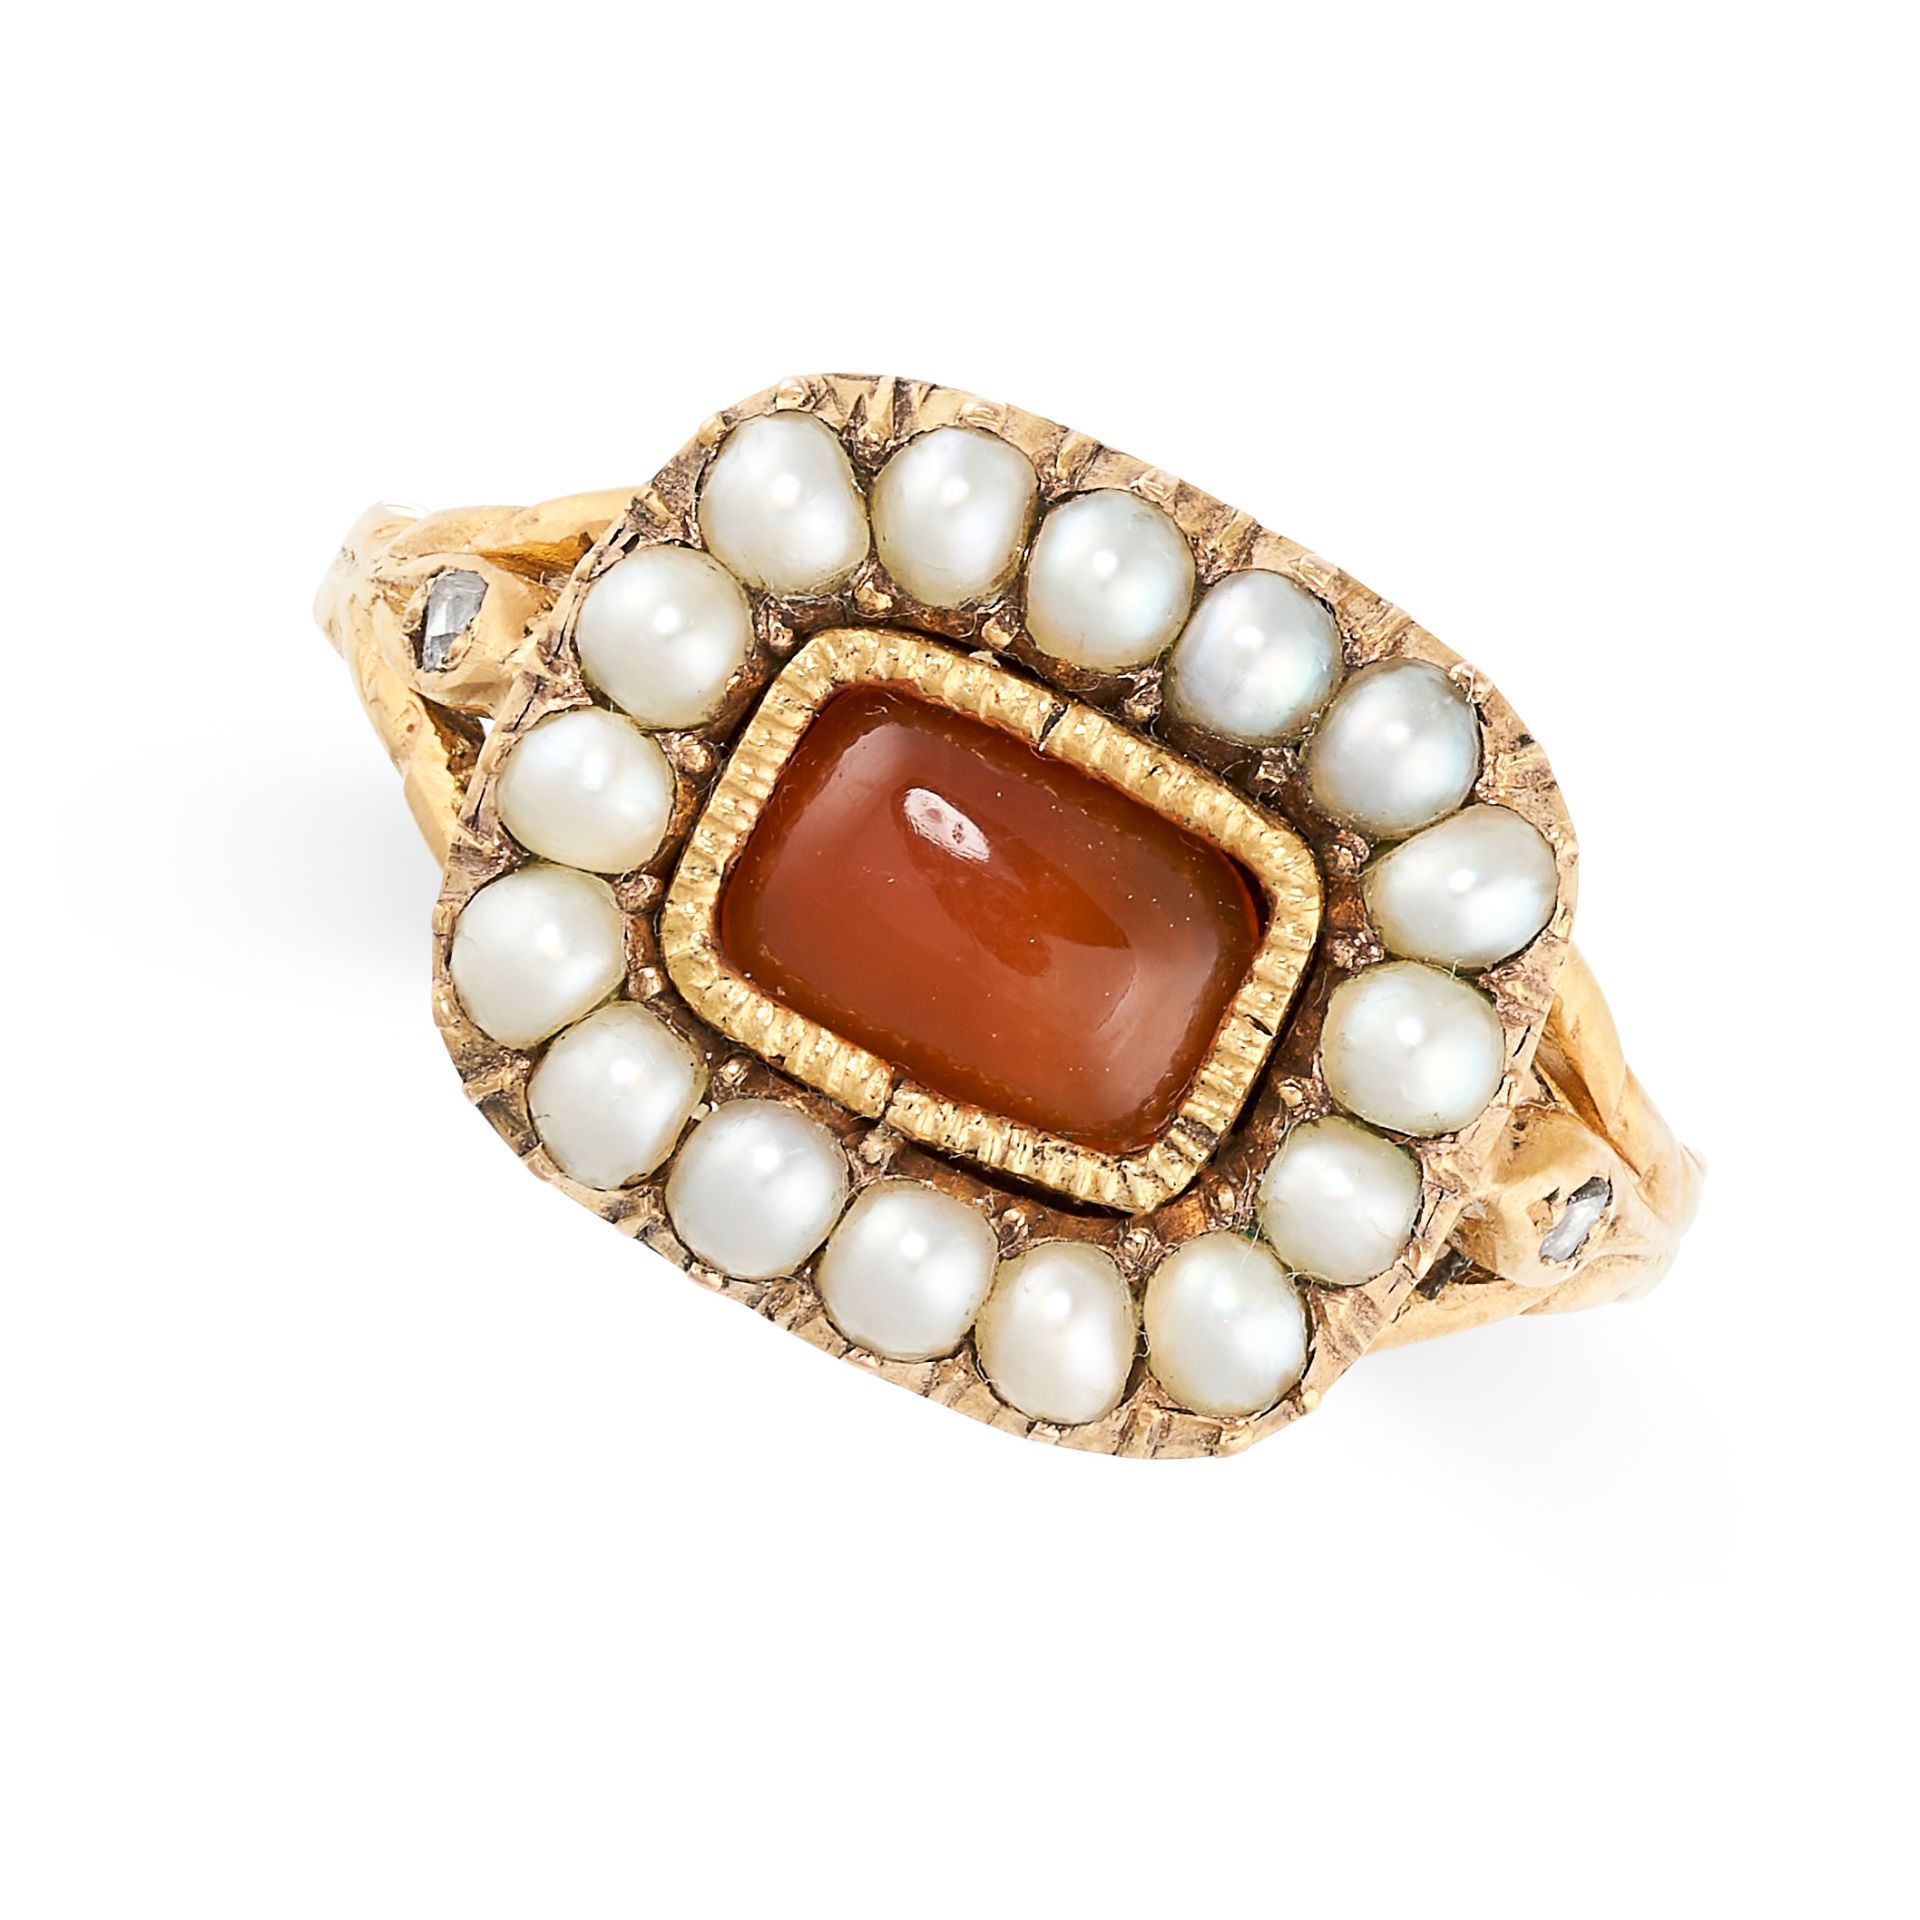 A CARNELIAN, PEARL AND DIAMOND RING in yellow gold, set with a cushion shaped cabochon carnelian